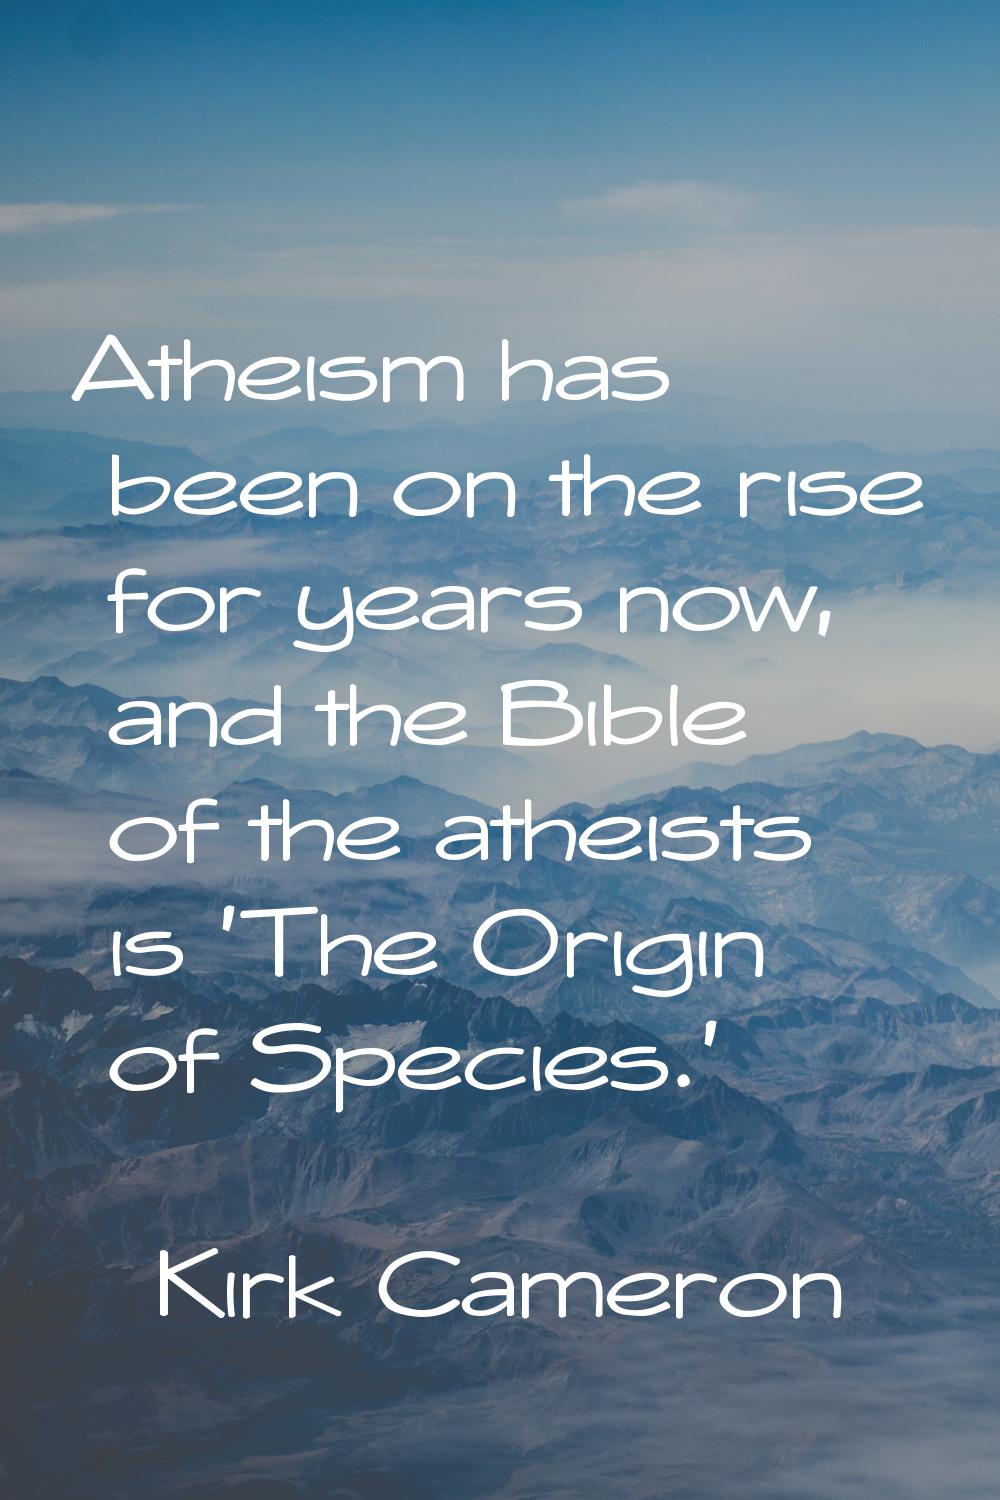 Atheism has been on the rise for years now, and the Bible of the atheists is 'The Origin of Species